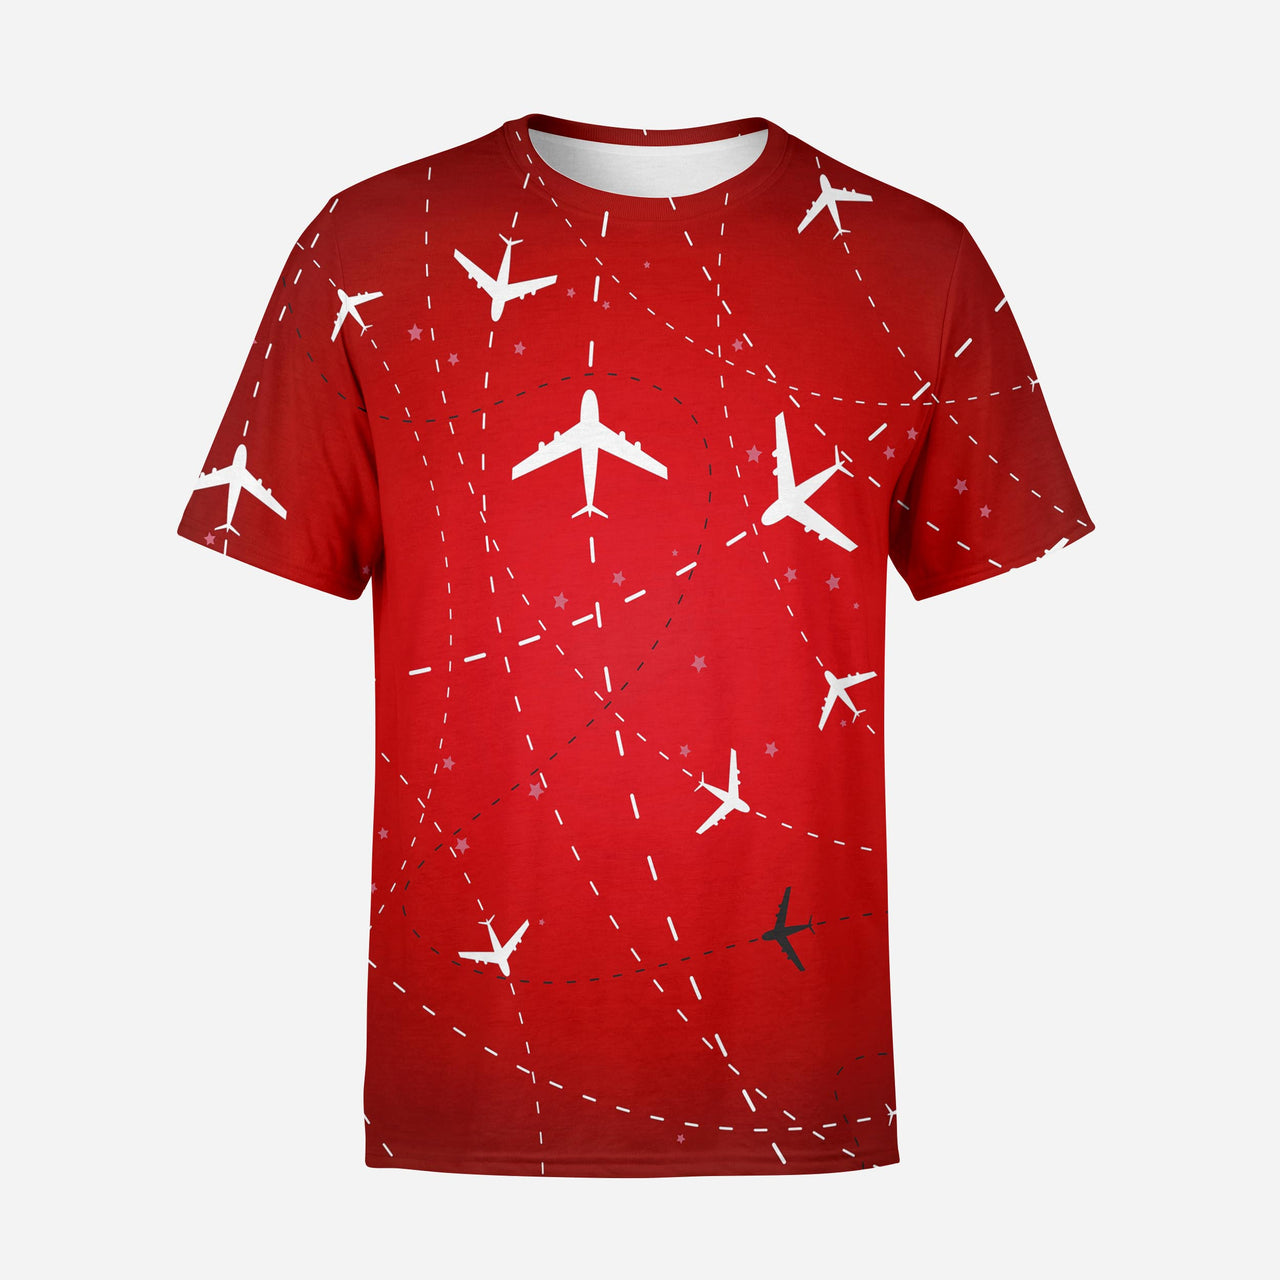 Travelling with Aircraft (Red) Designed 3D T-Shirts